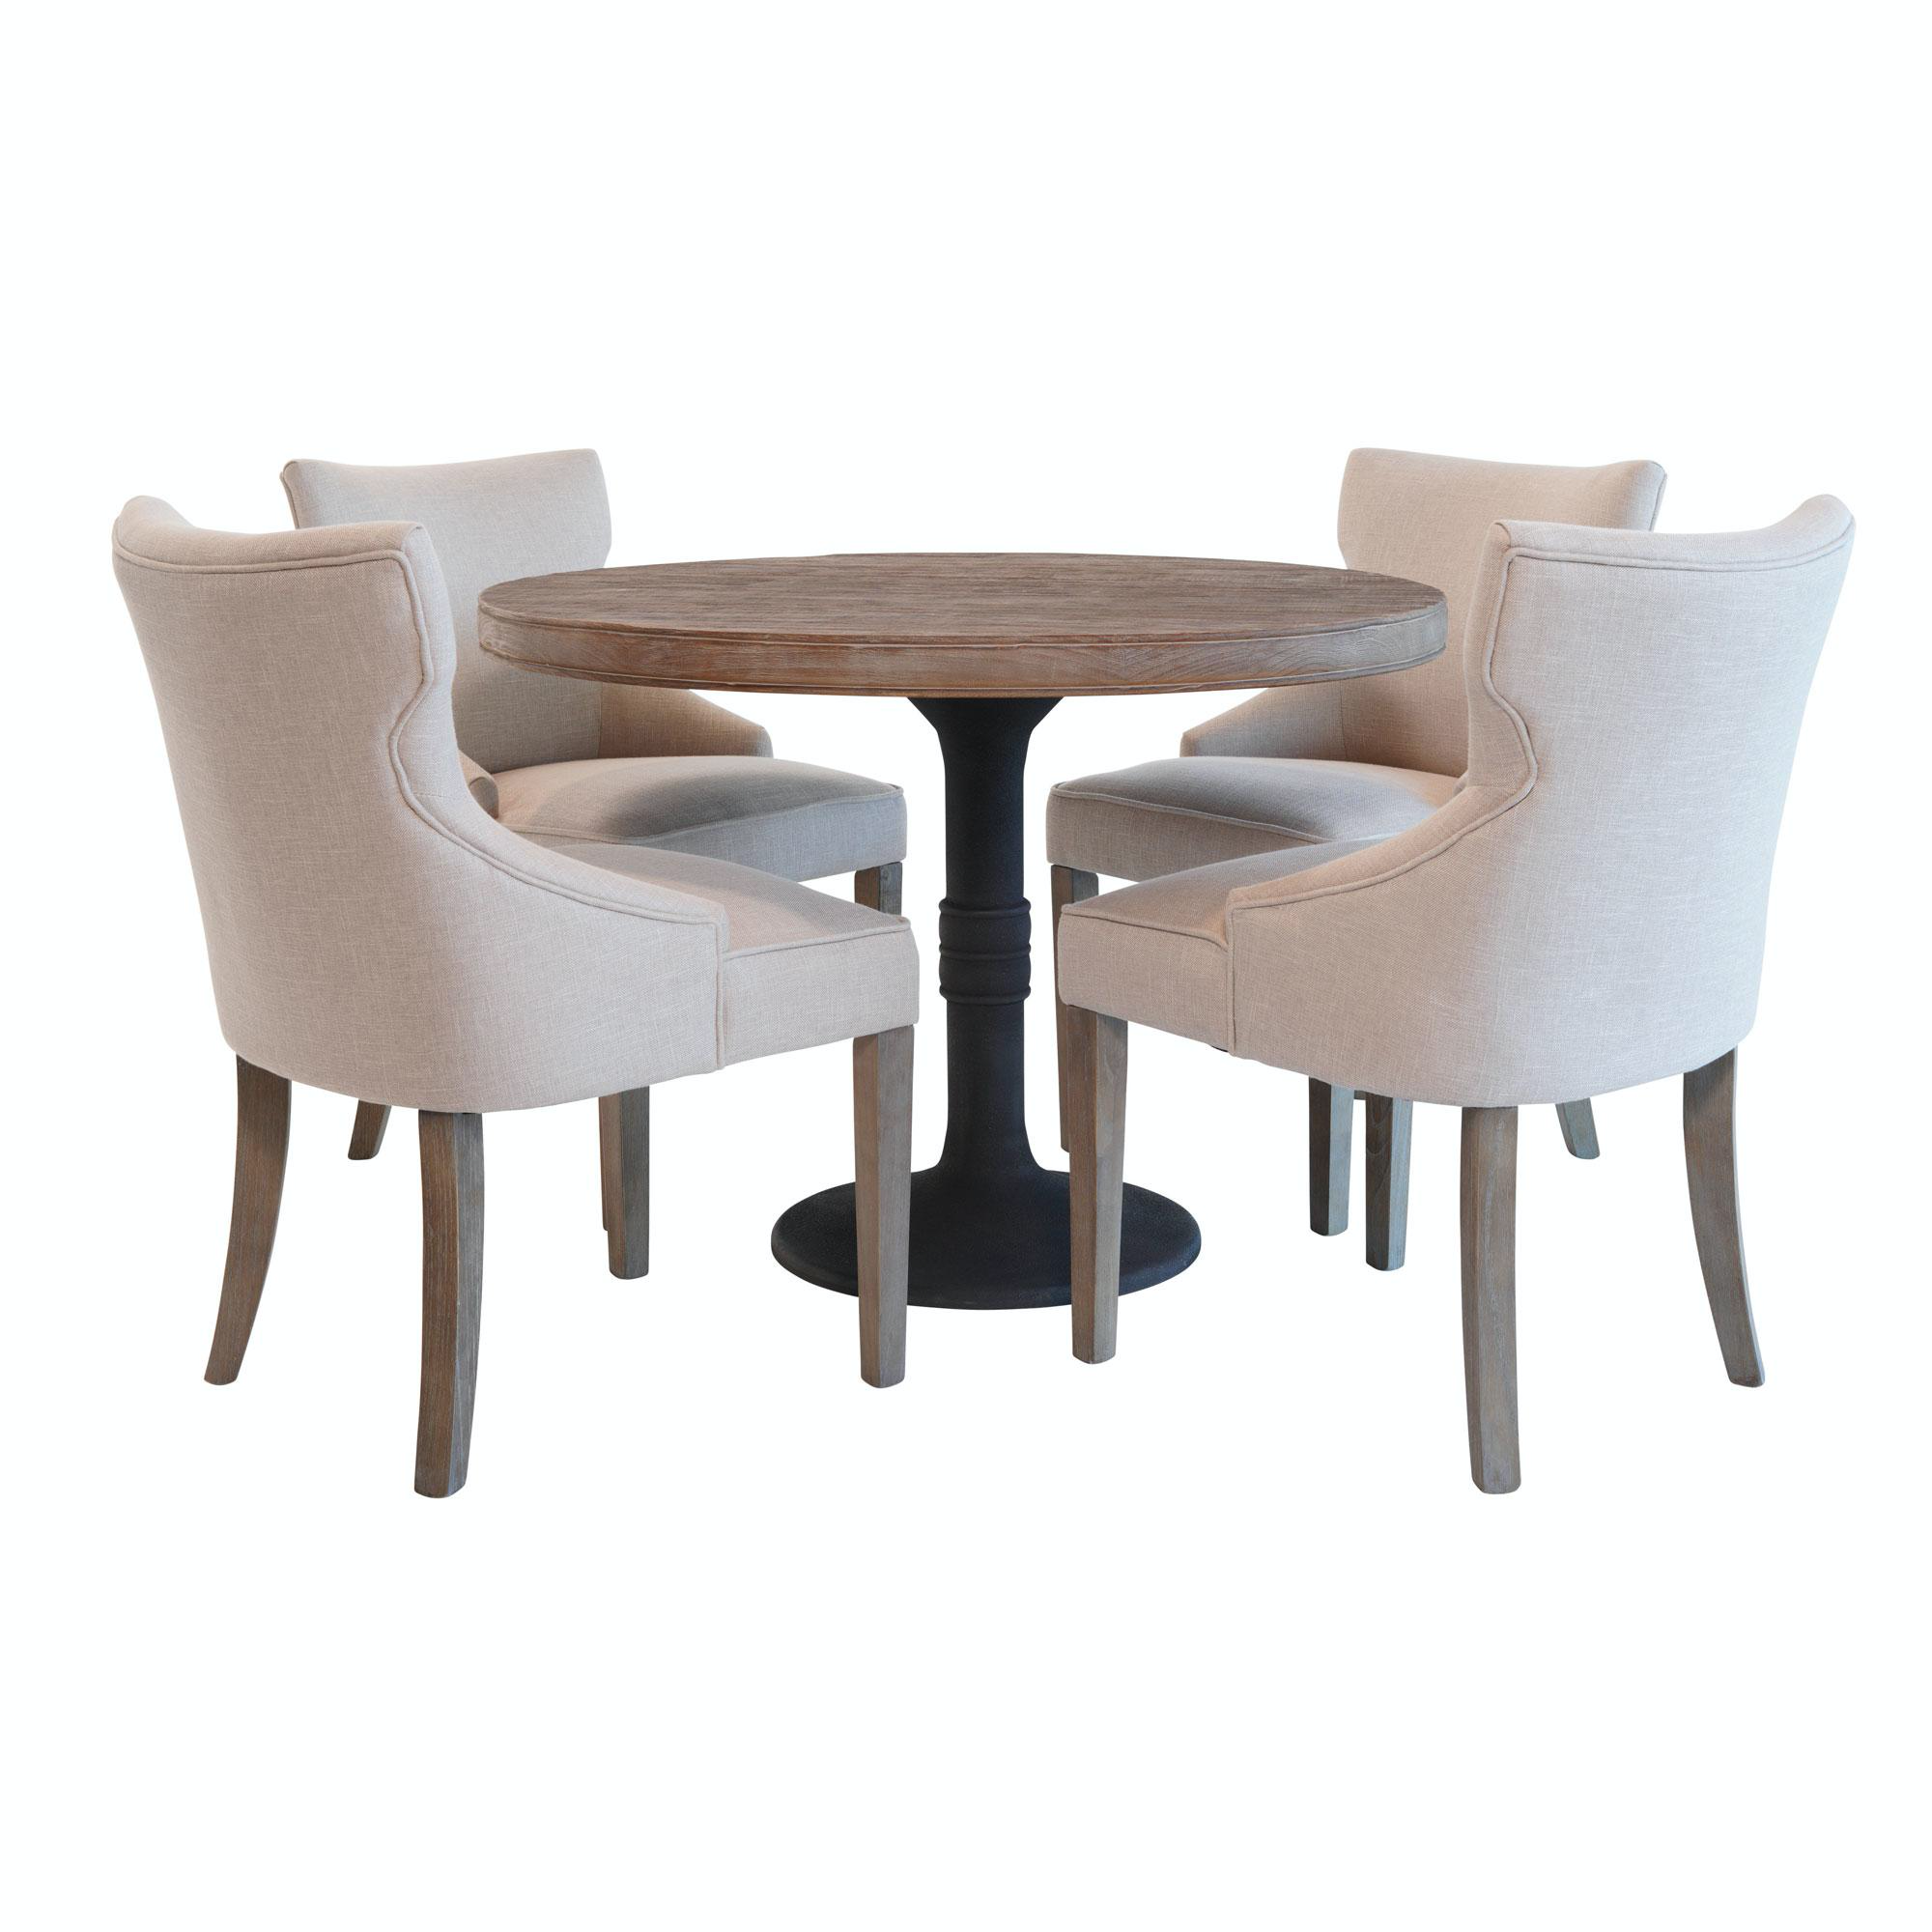 Comparing Shellac Vs. Catalyzed Wood Dining Set Finishes - Furniture Fair